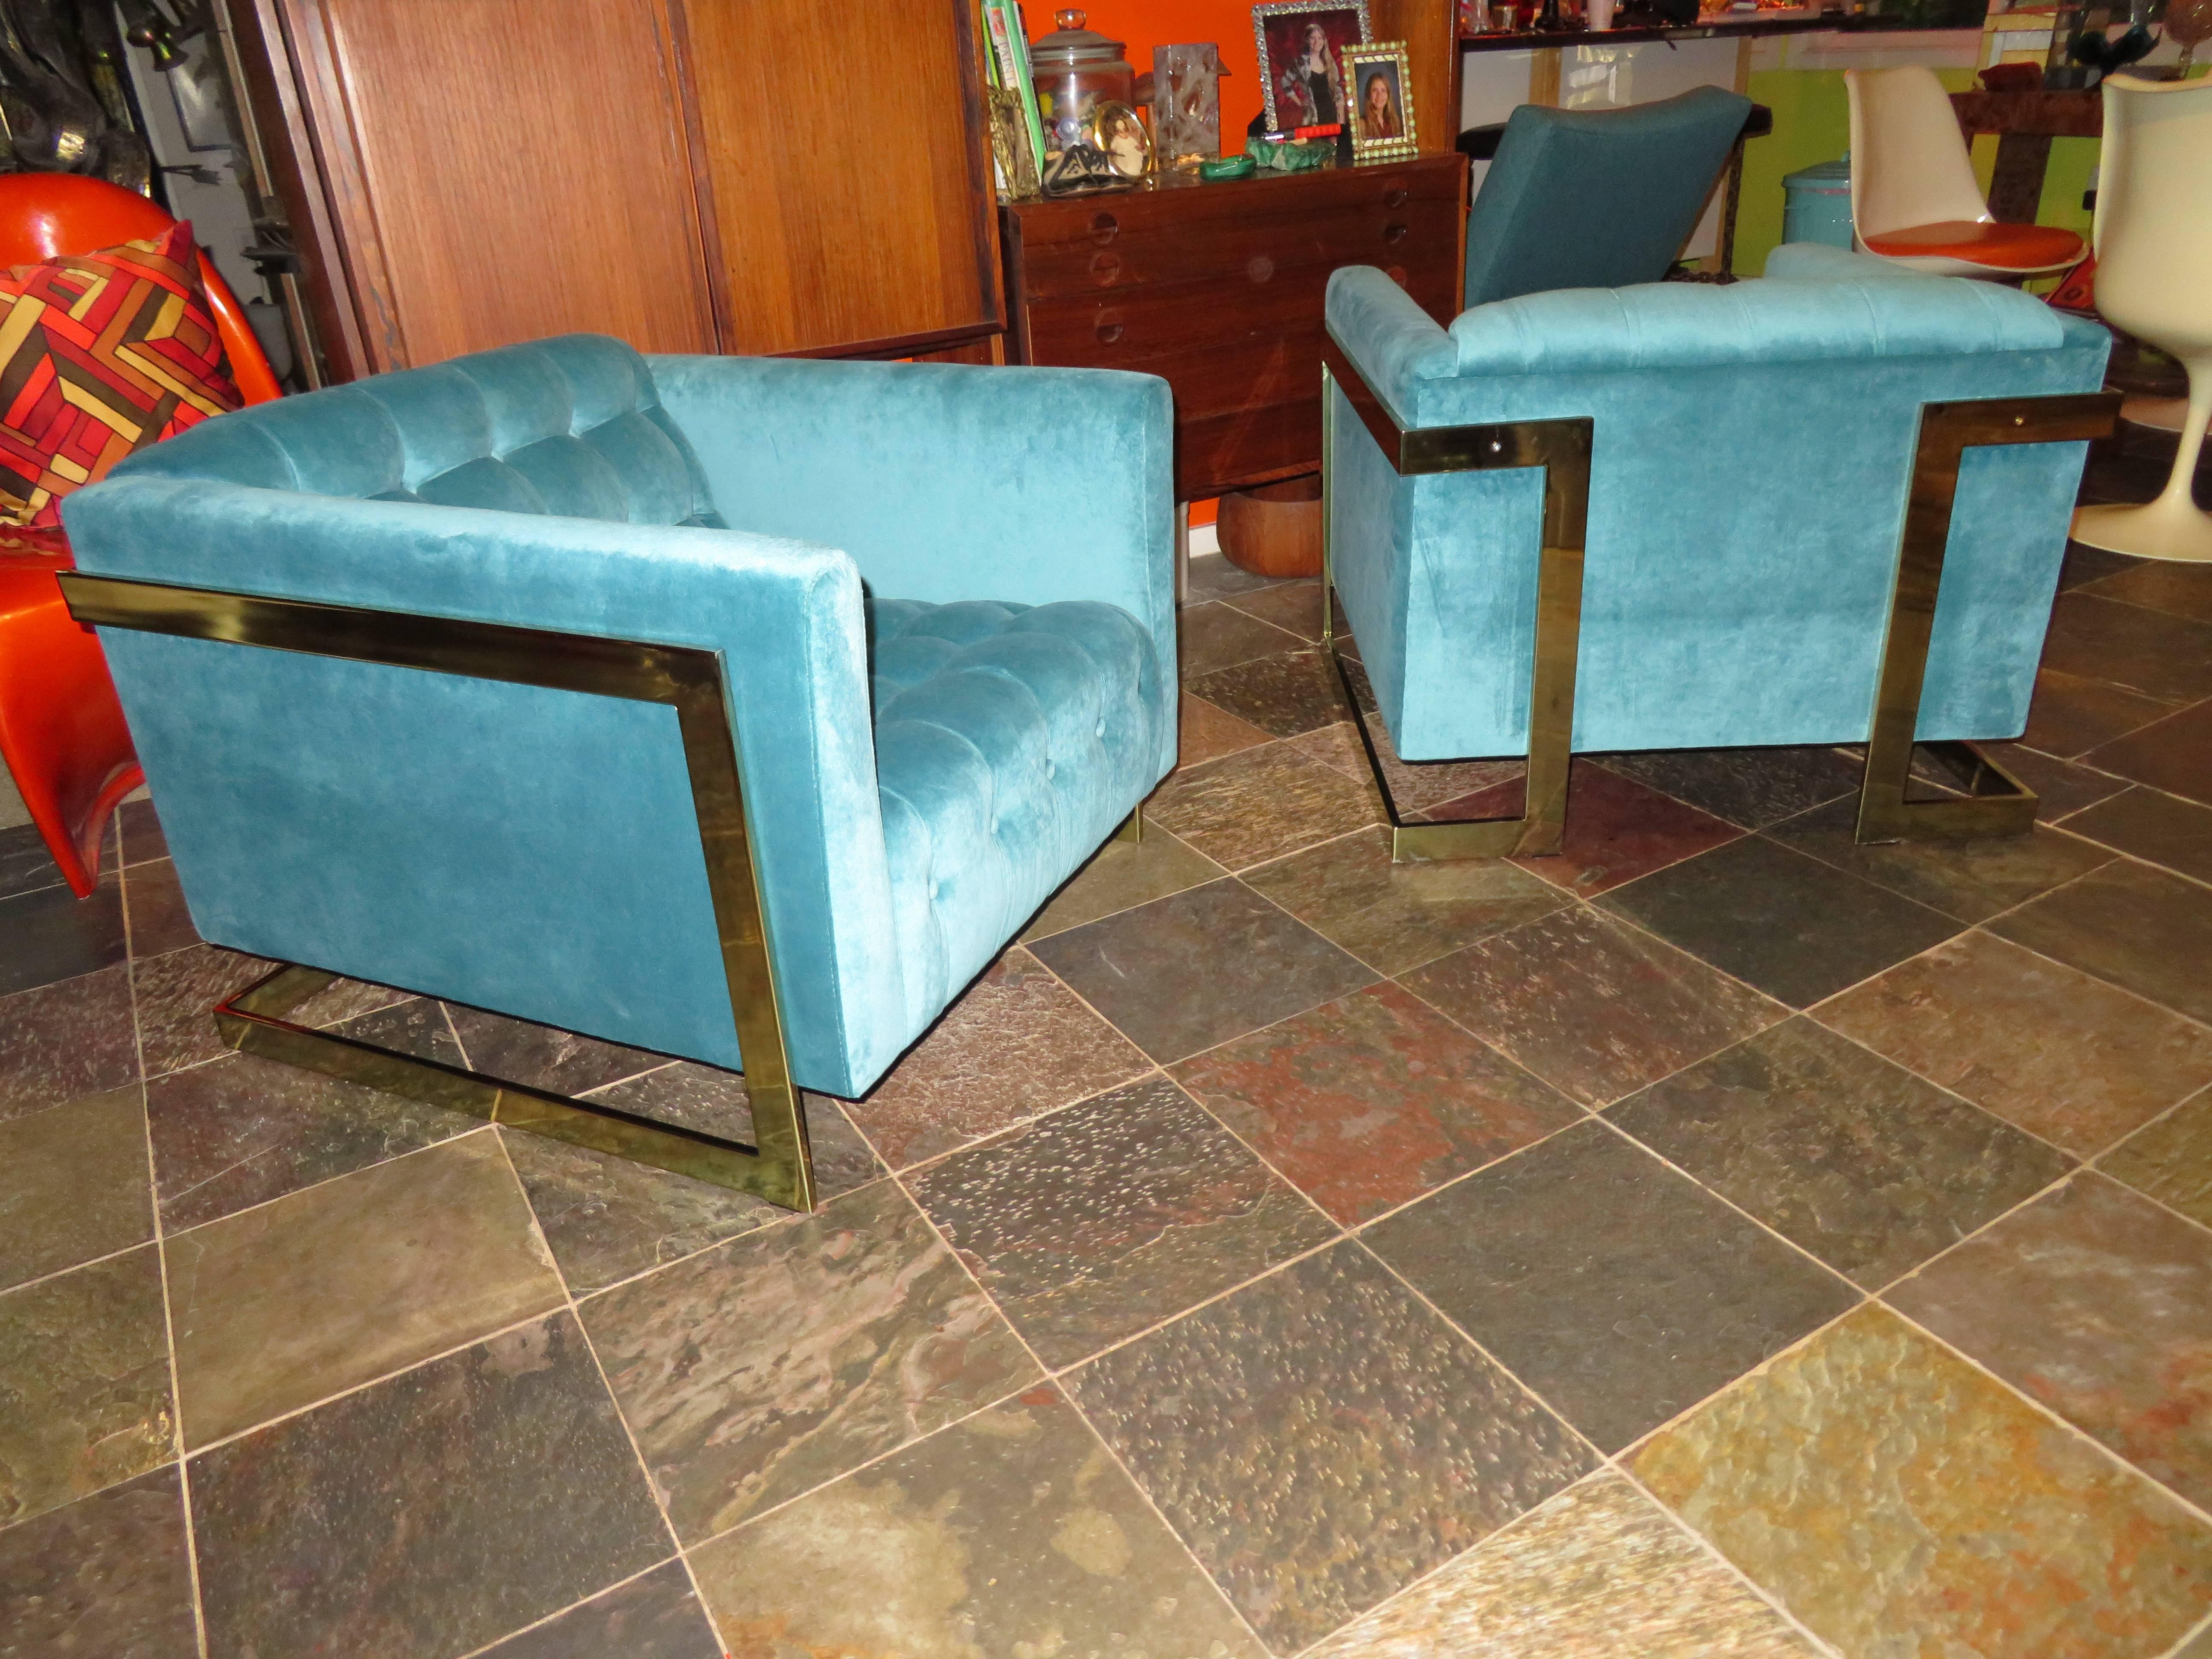 Magnificent Milo Baughman style pair of biscuit tufted brass cube lounge chairs by Carsons of High Point. This pair is in excellent condition with brand new high end peacock blue velvet upholstery and shiny brass frames. The original finish on the